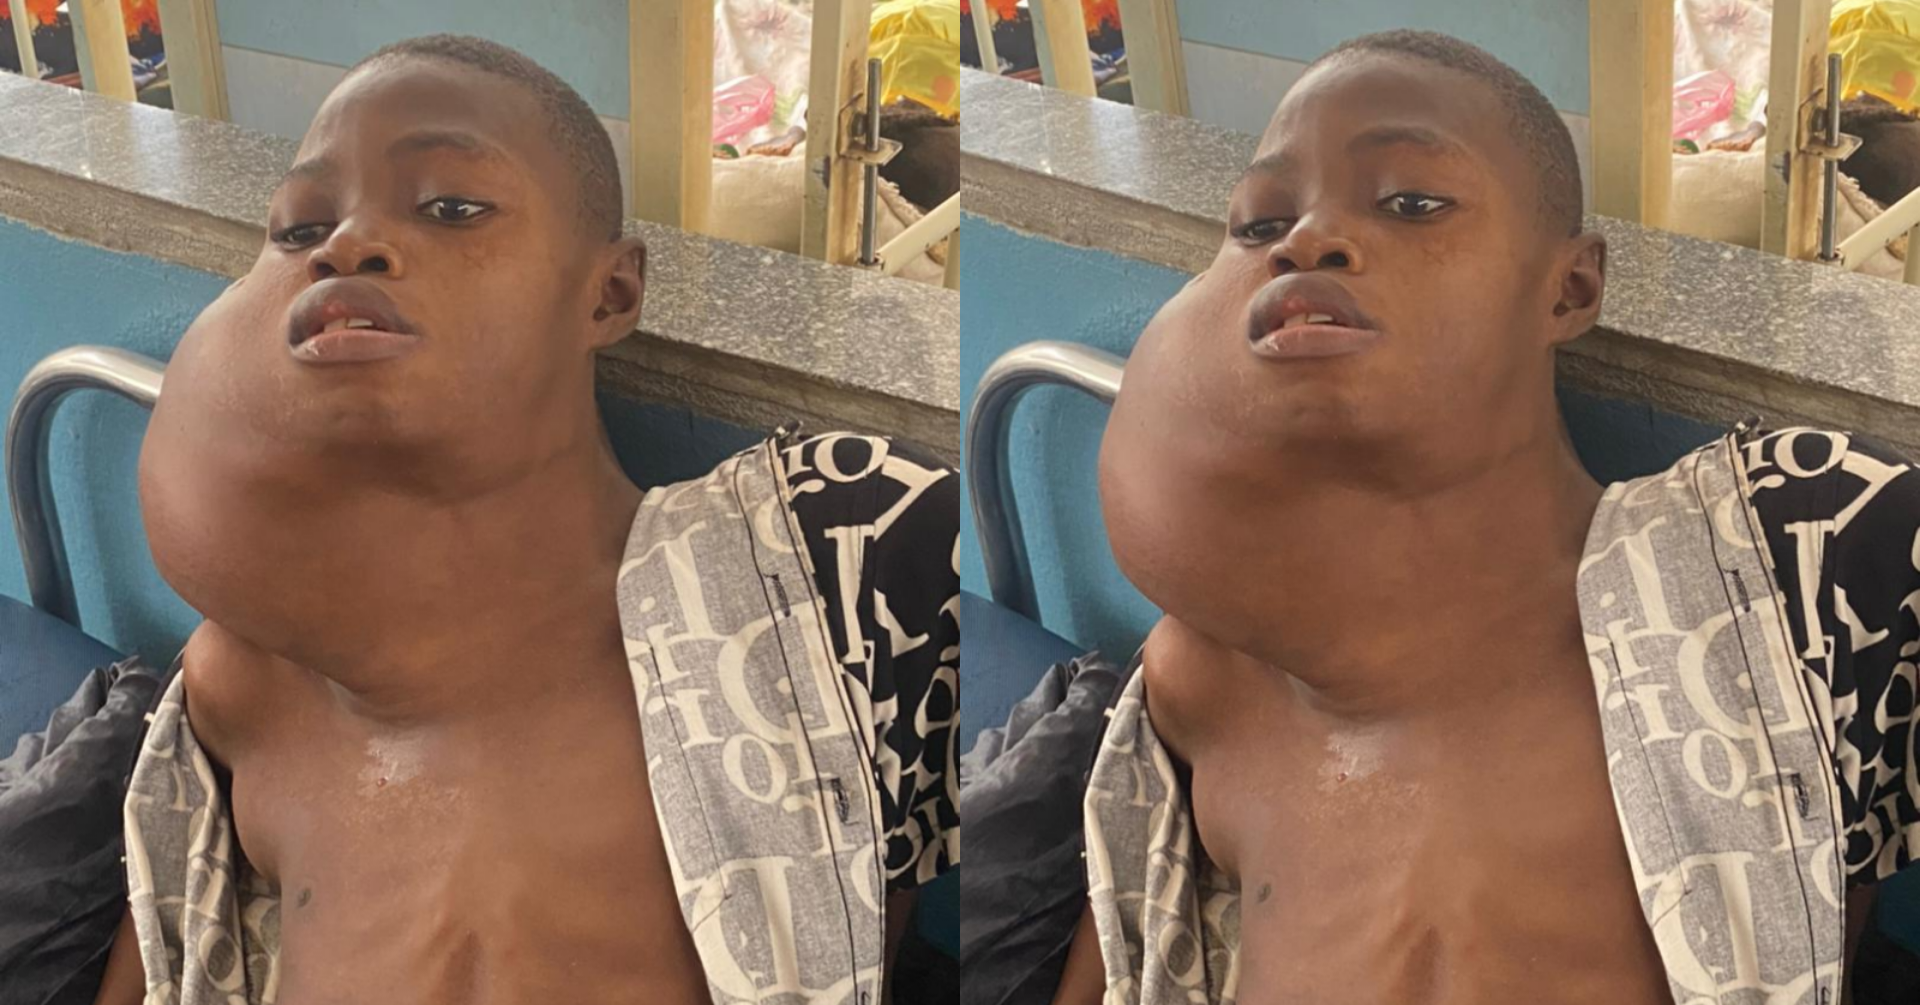 Boy With Giant Neck Tumor Cries For Help